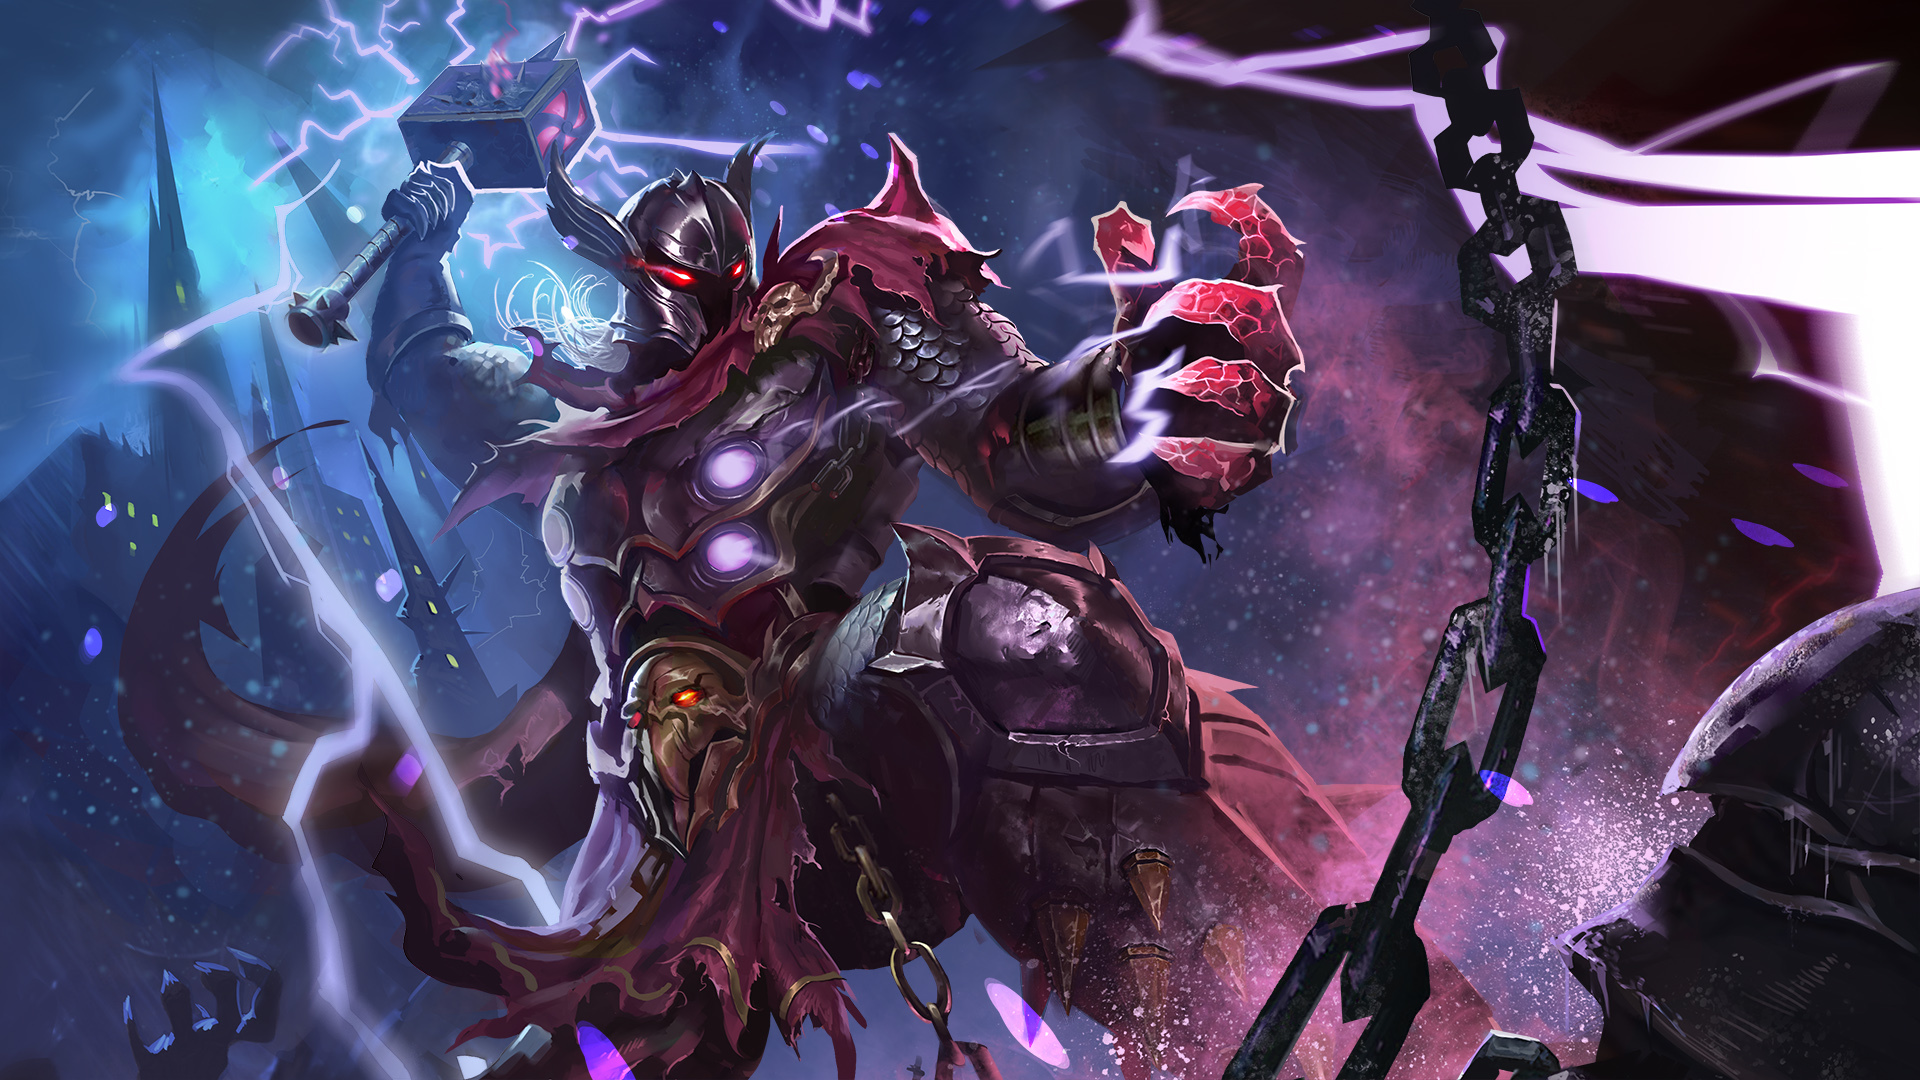 Video Game Heroes Of Newerth HD Wallpaper | Background Image